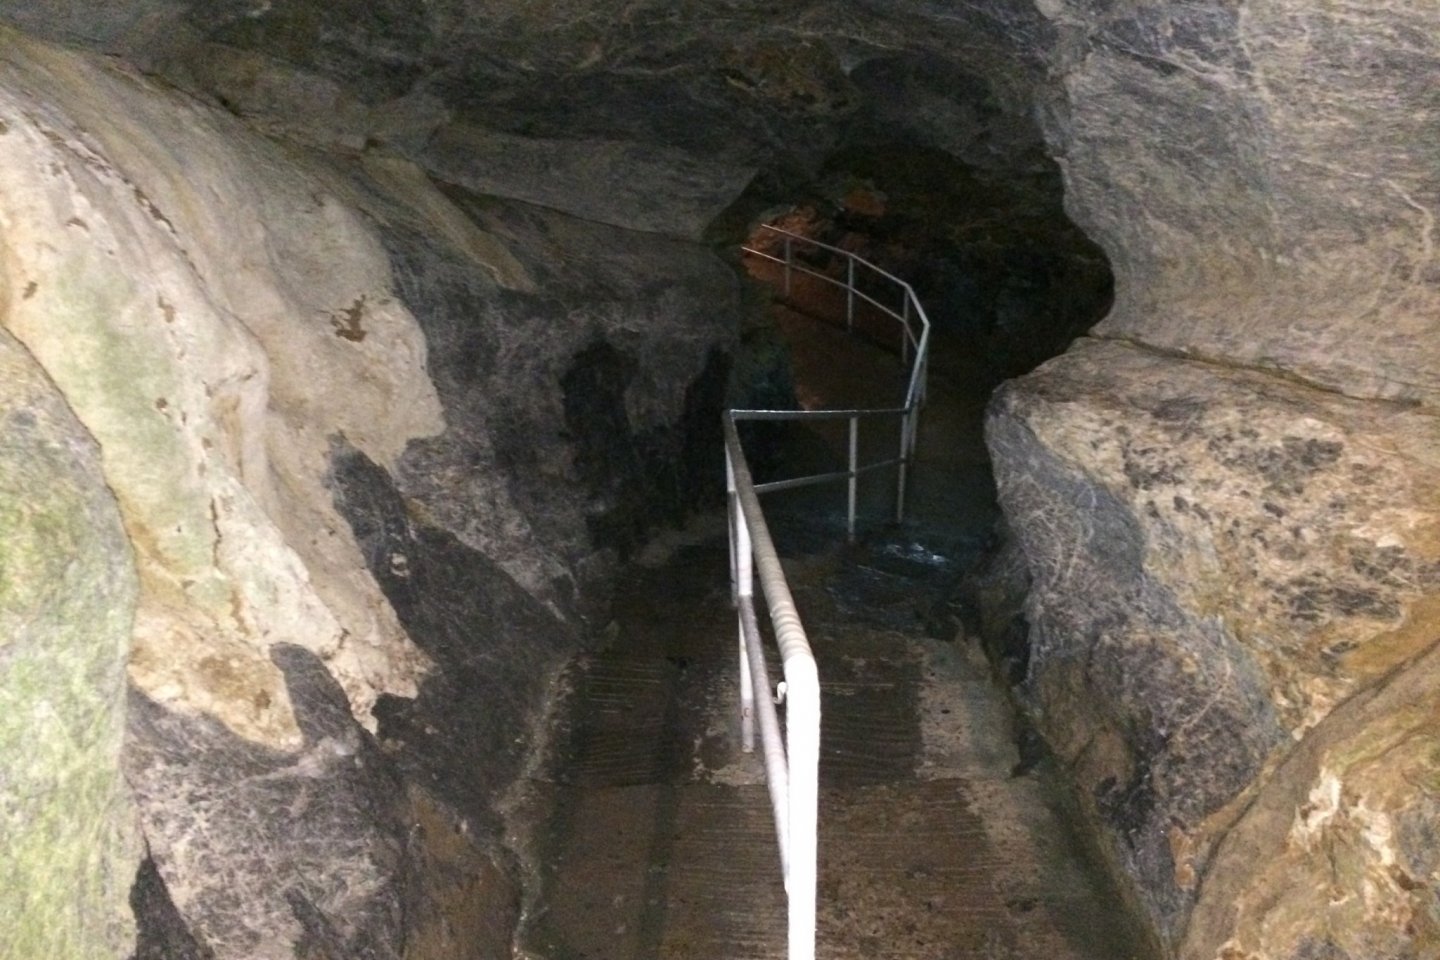 Going ahead inside of the cave.